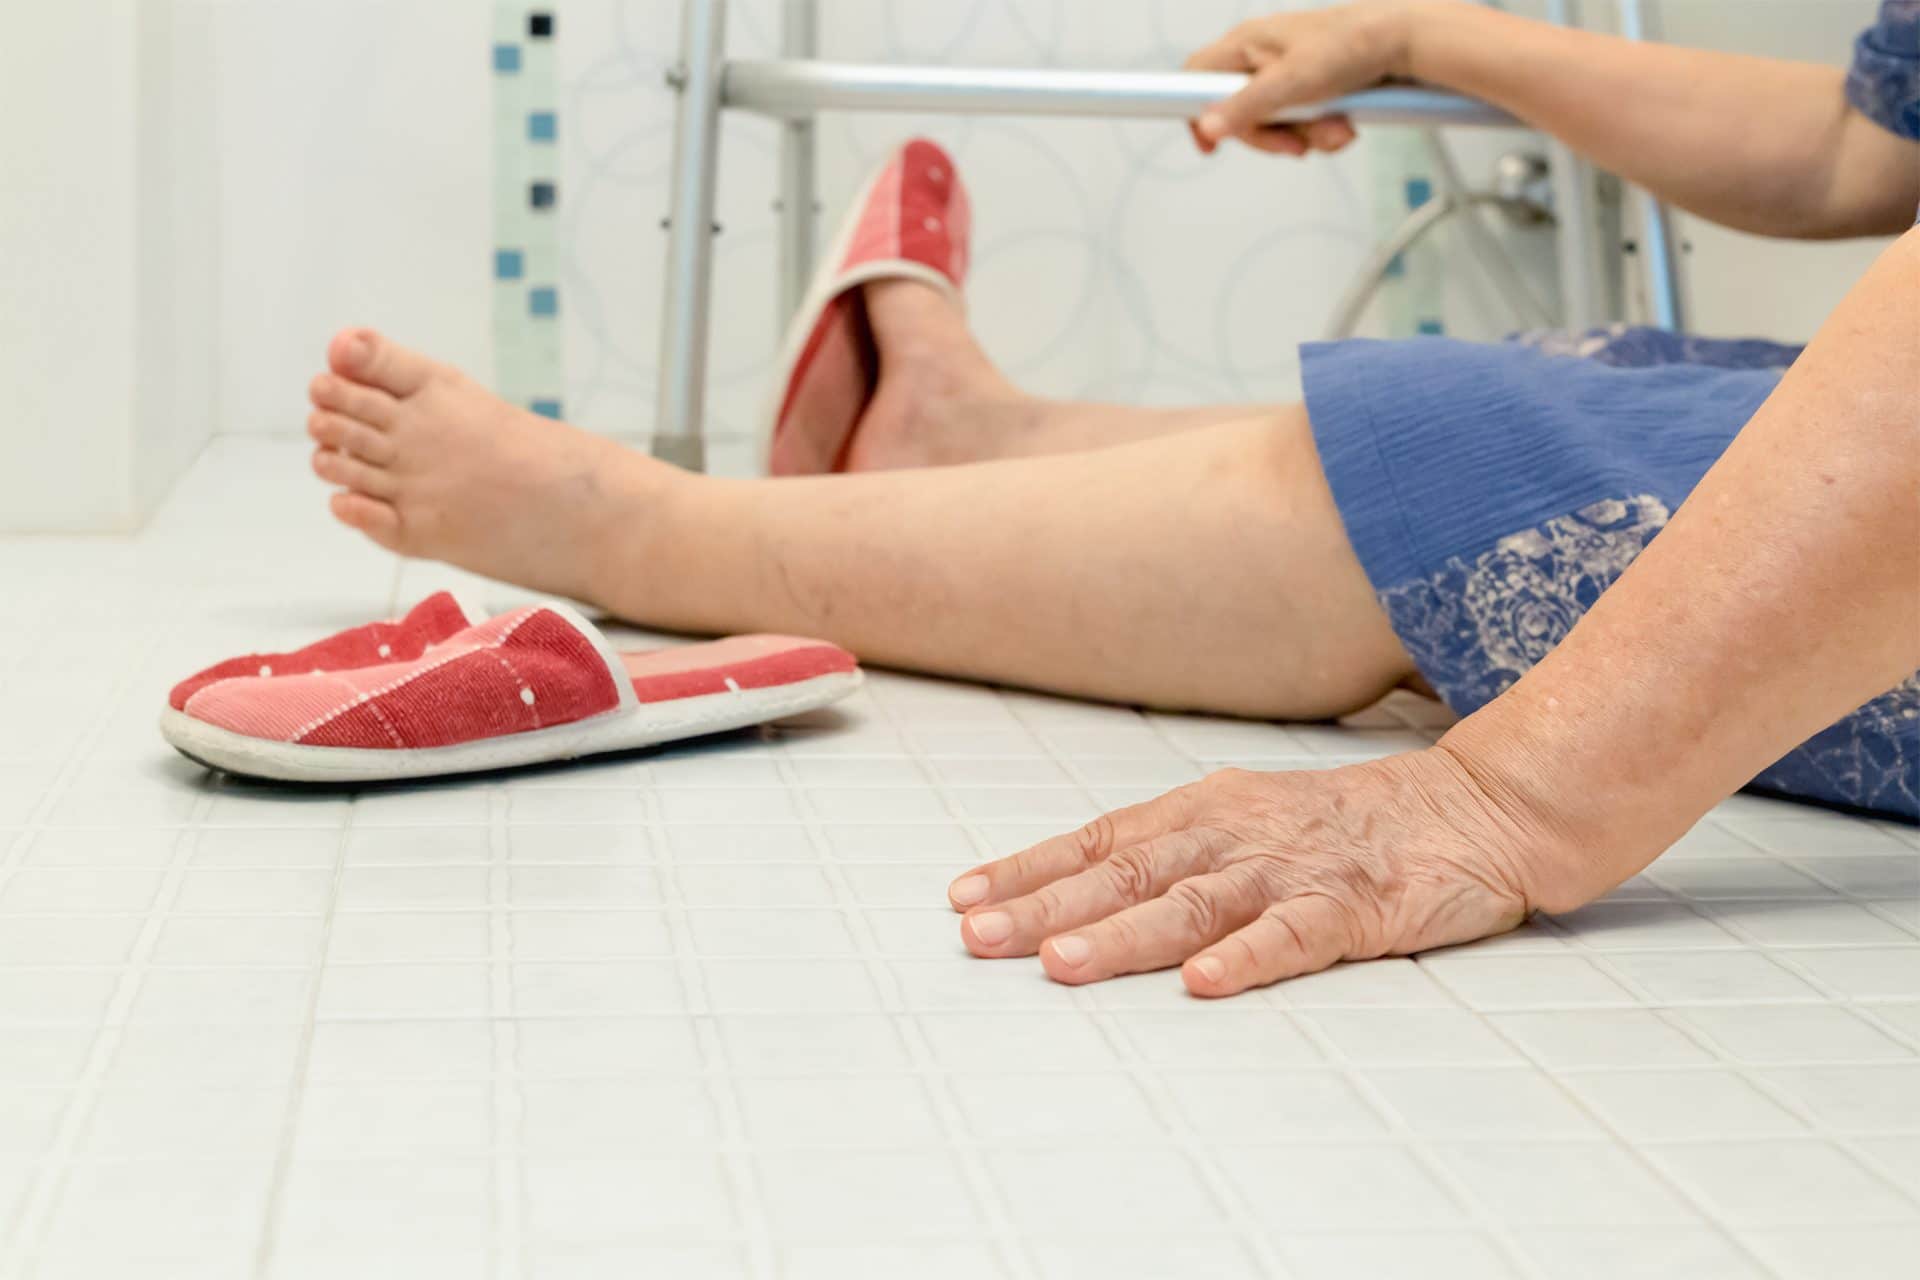 close shot of slippery bathroom floor and legs of a woman after she slip and fell on the bathroom floor